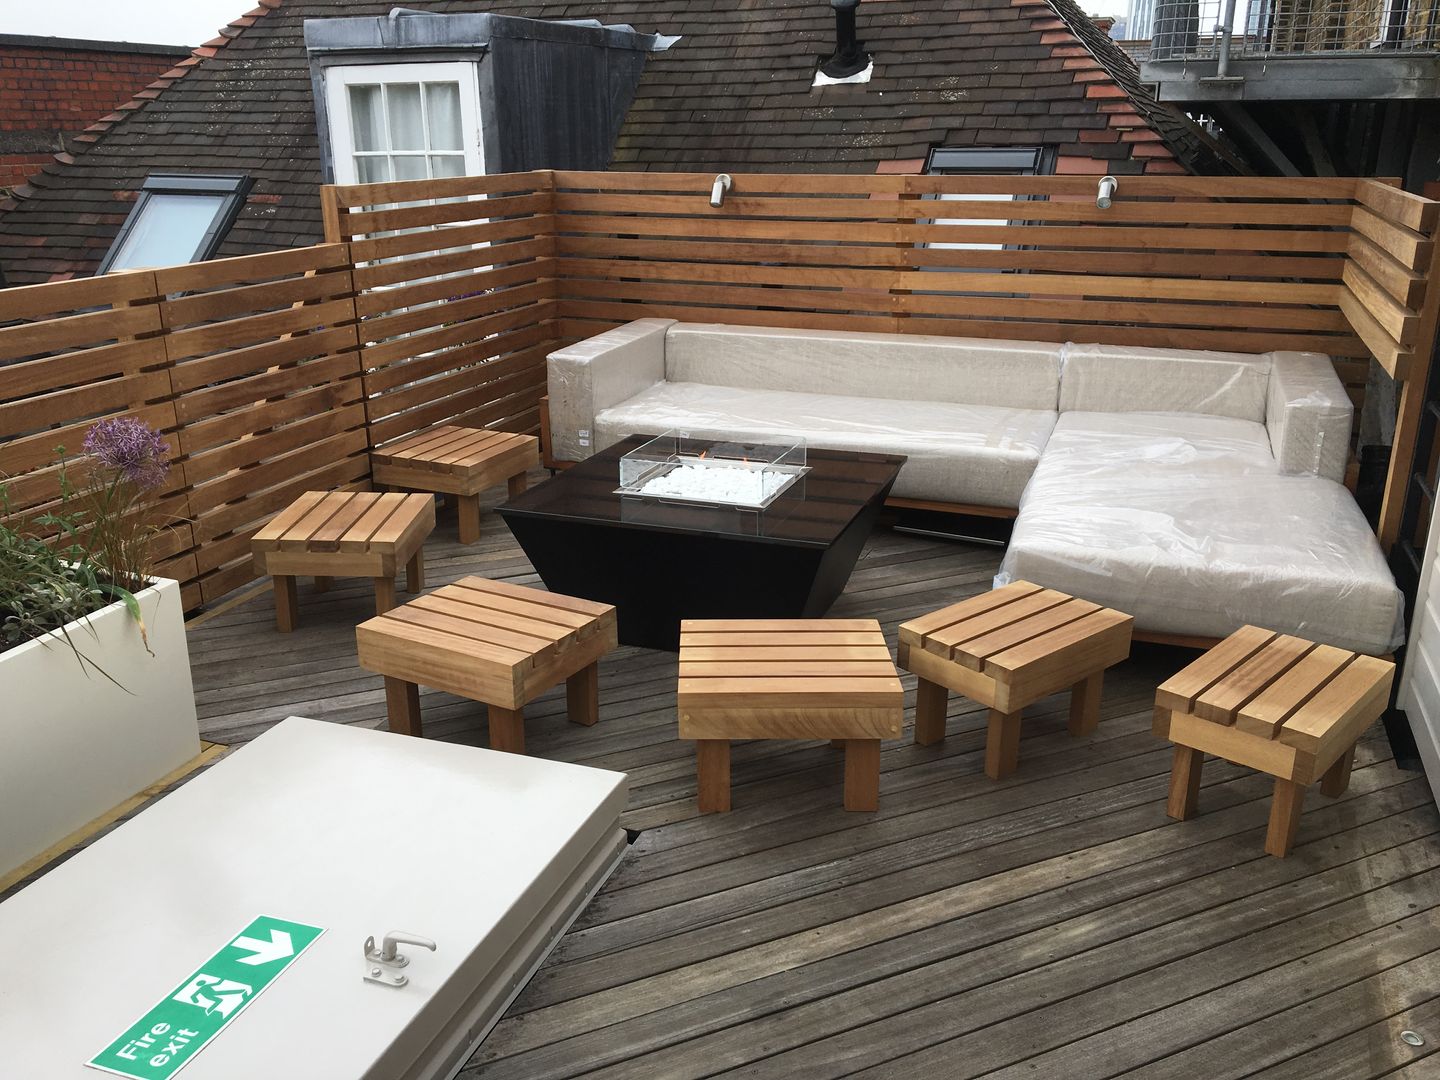 Aztec Gas Fire Table - Rooftop Garden (London) Rivelin Modern style gardens Fire pits & barbecues